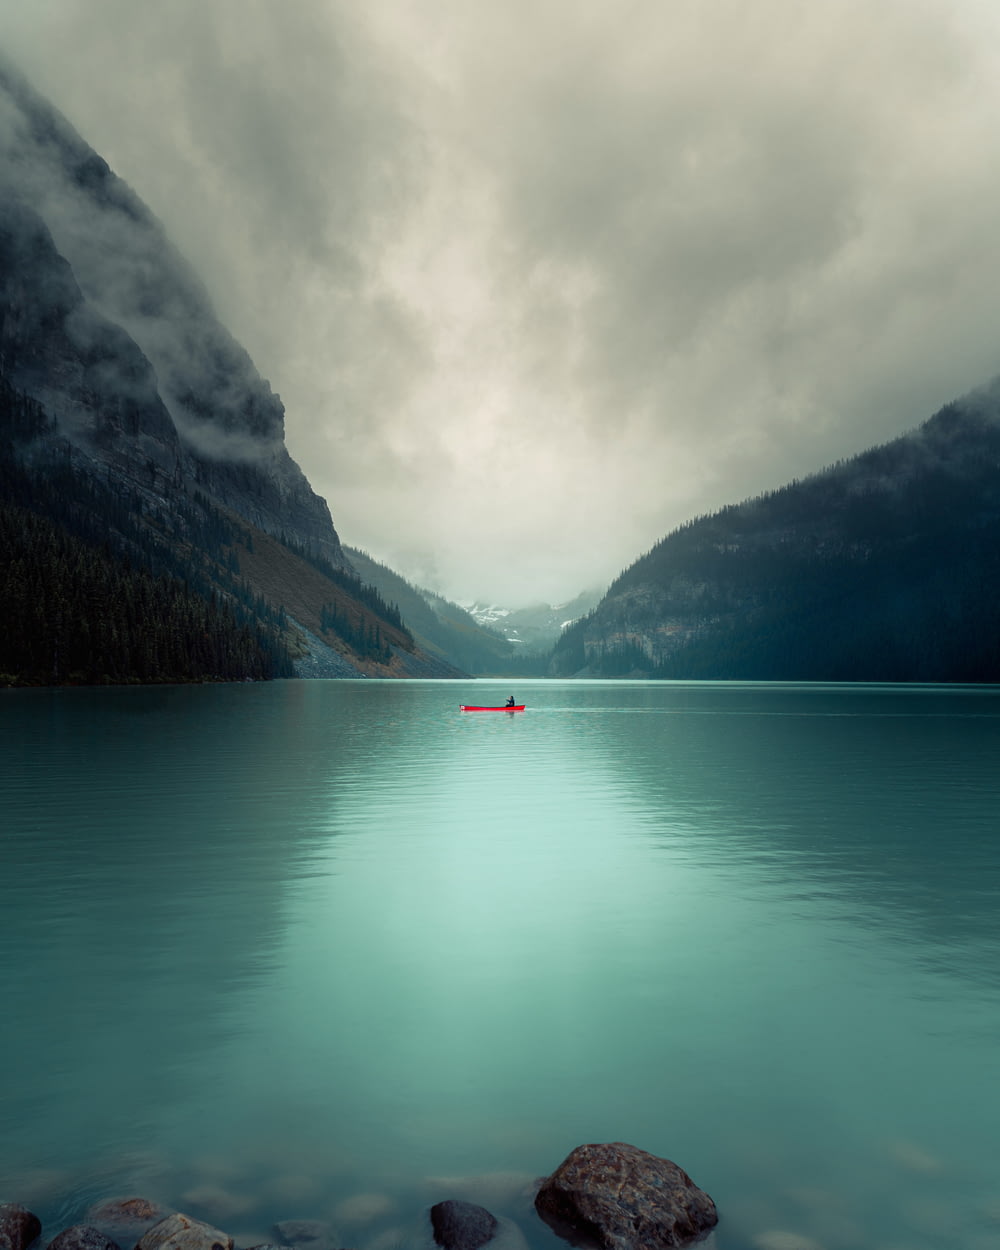 red boat on calm water near mountain during daytime